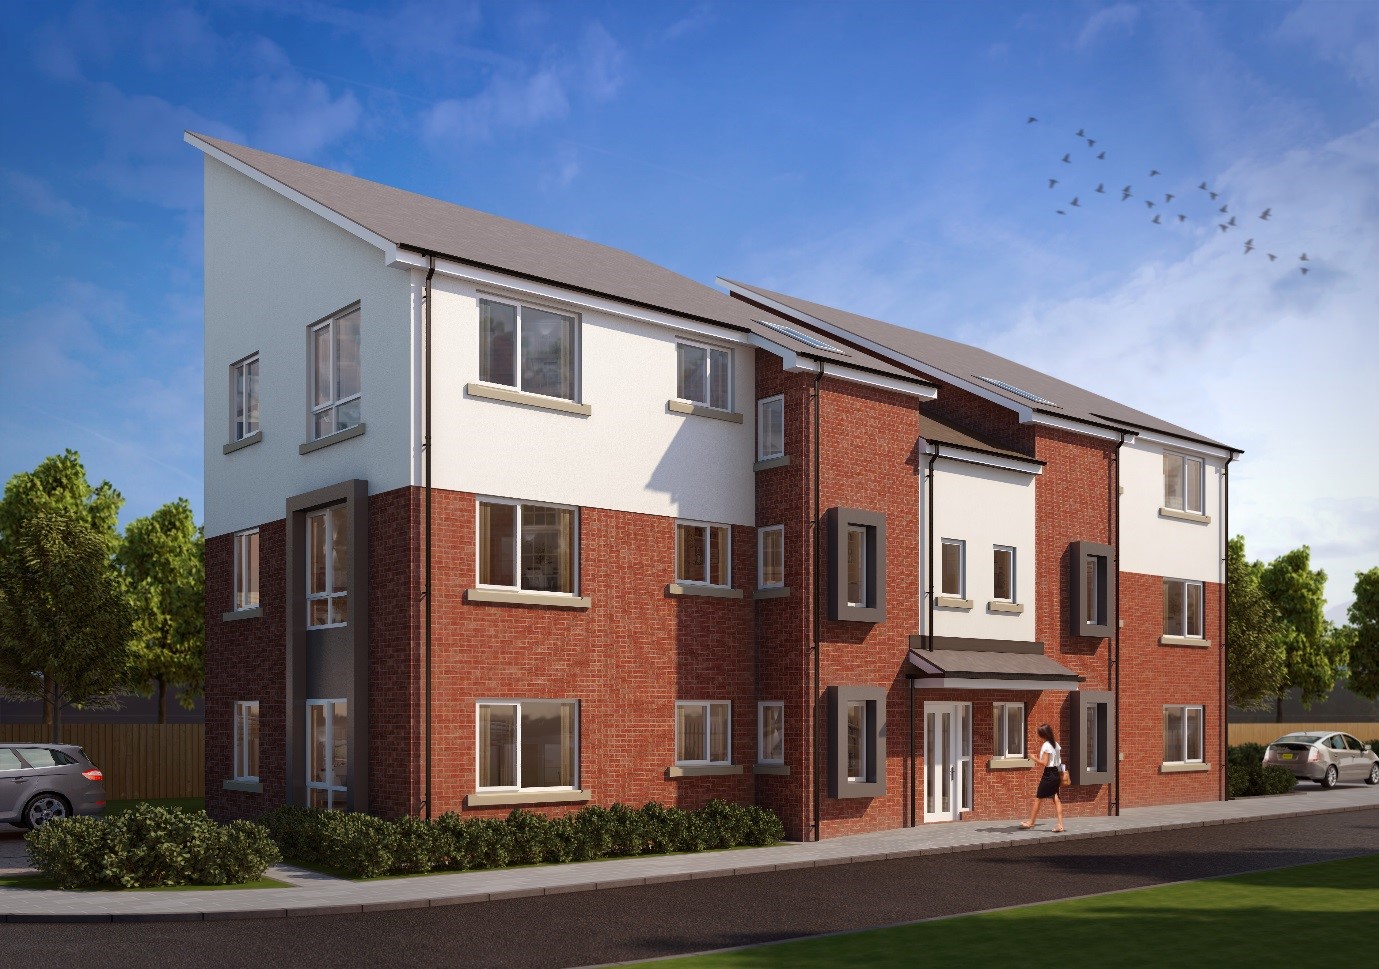 affordable housing, leeds engineer, manchester engineer, adept engineers, STG, Knowsley, Pinnington PLace